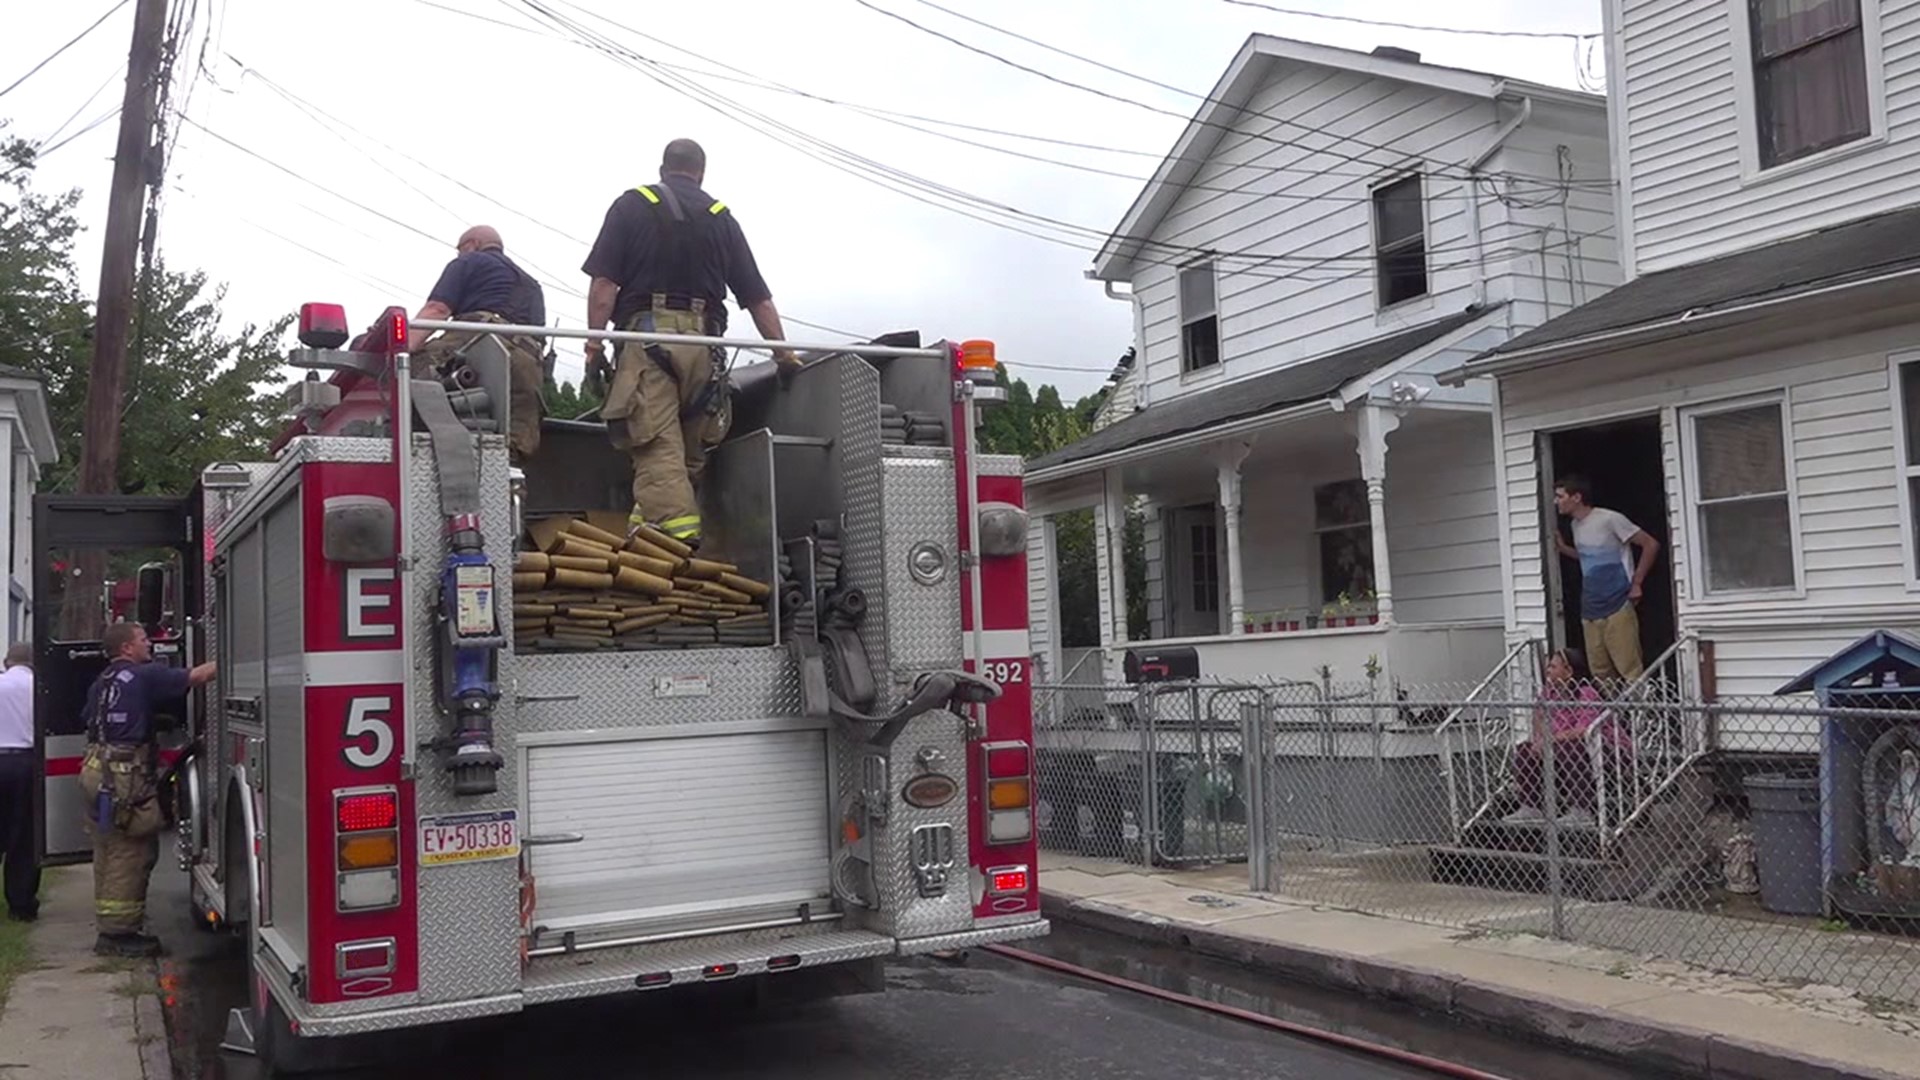 Flames broke out shortly before 10 a.m. along Carbon Lane in Wilkes-Barre.